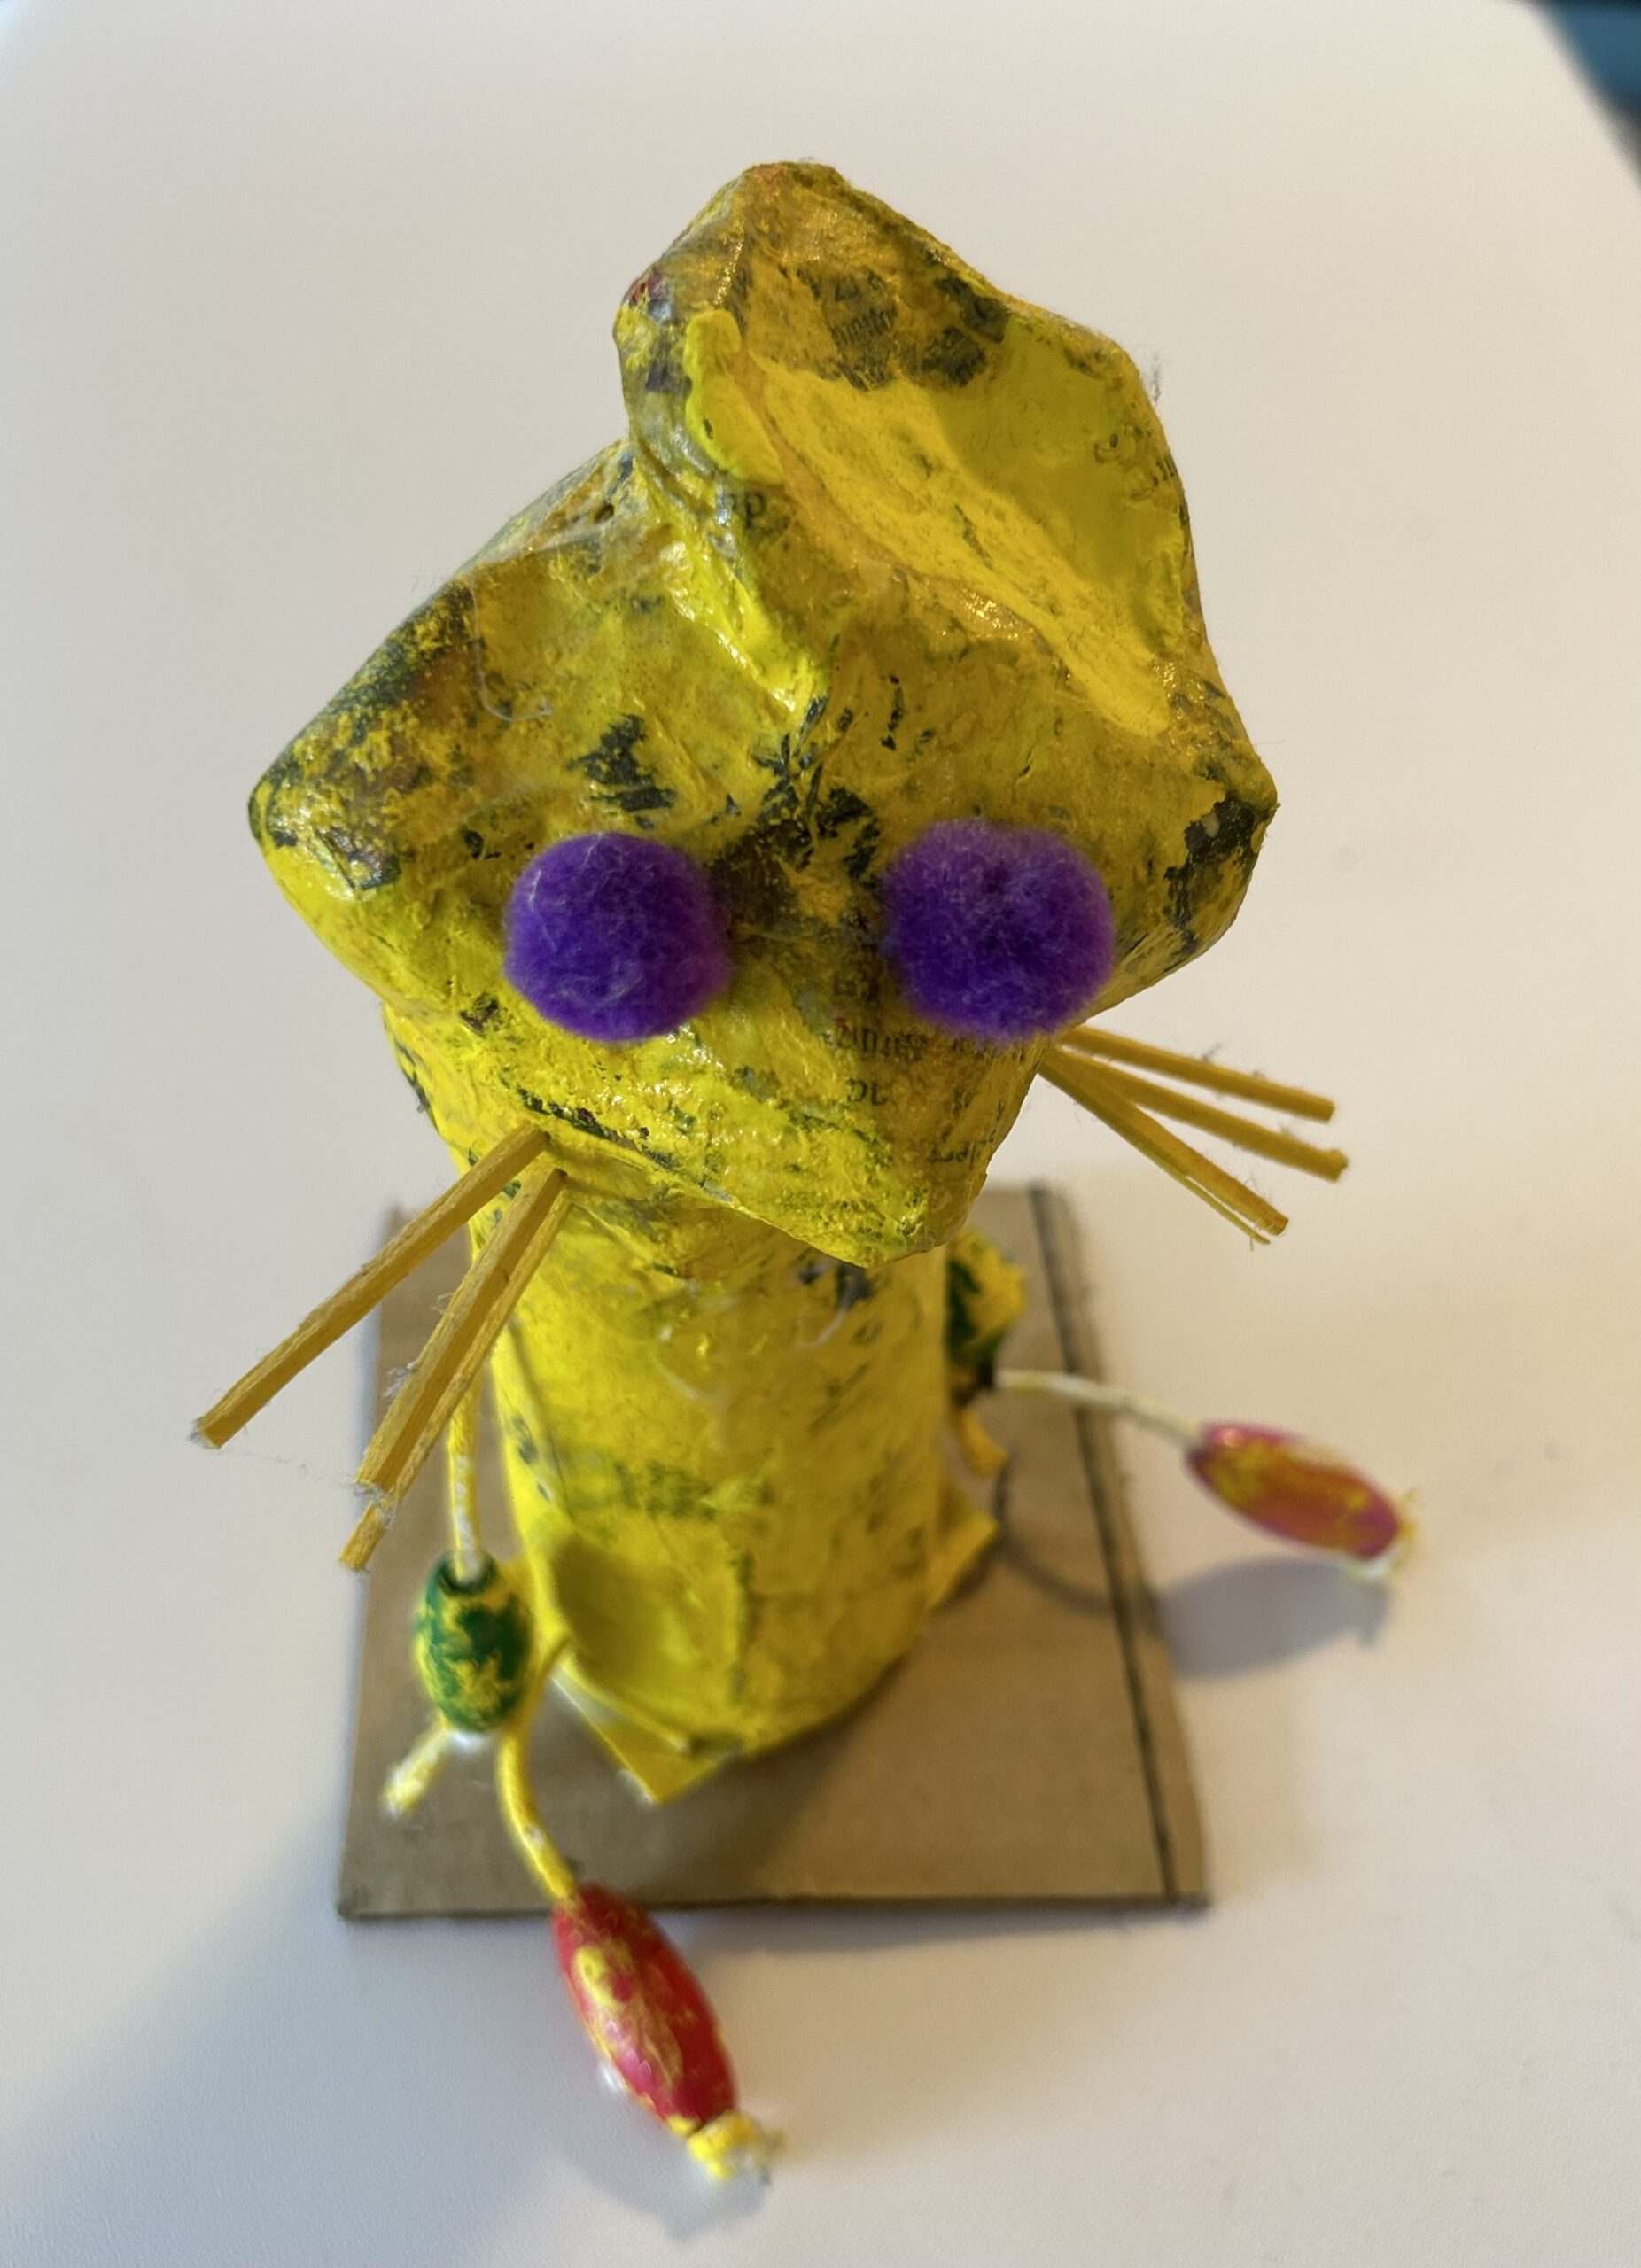 a yellow paper mache creature with purple puff eyes and toothpick extremities made by a child